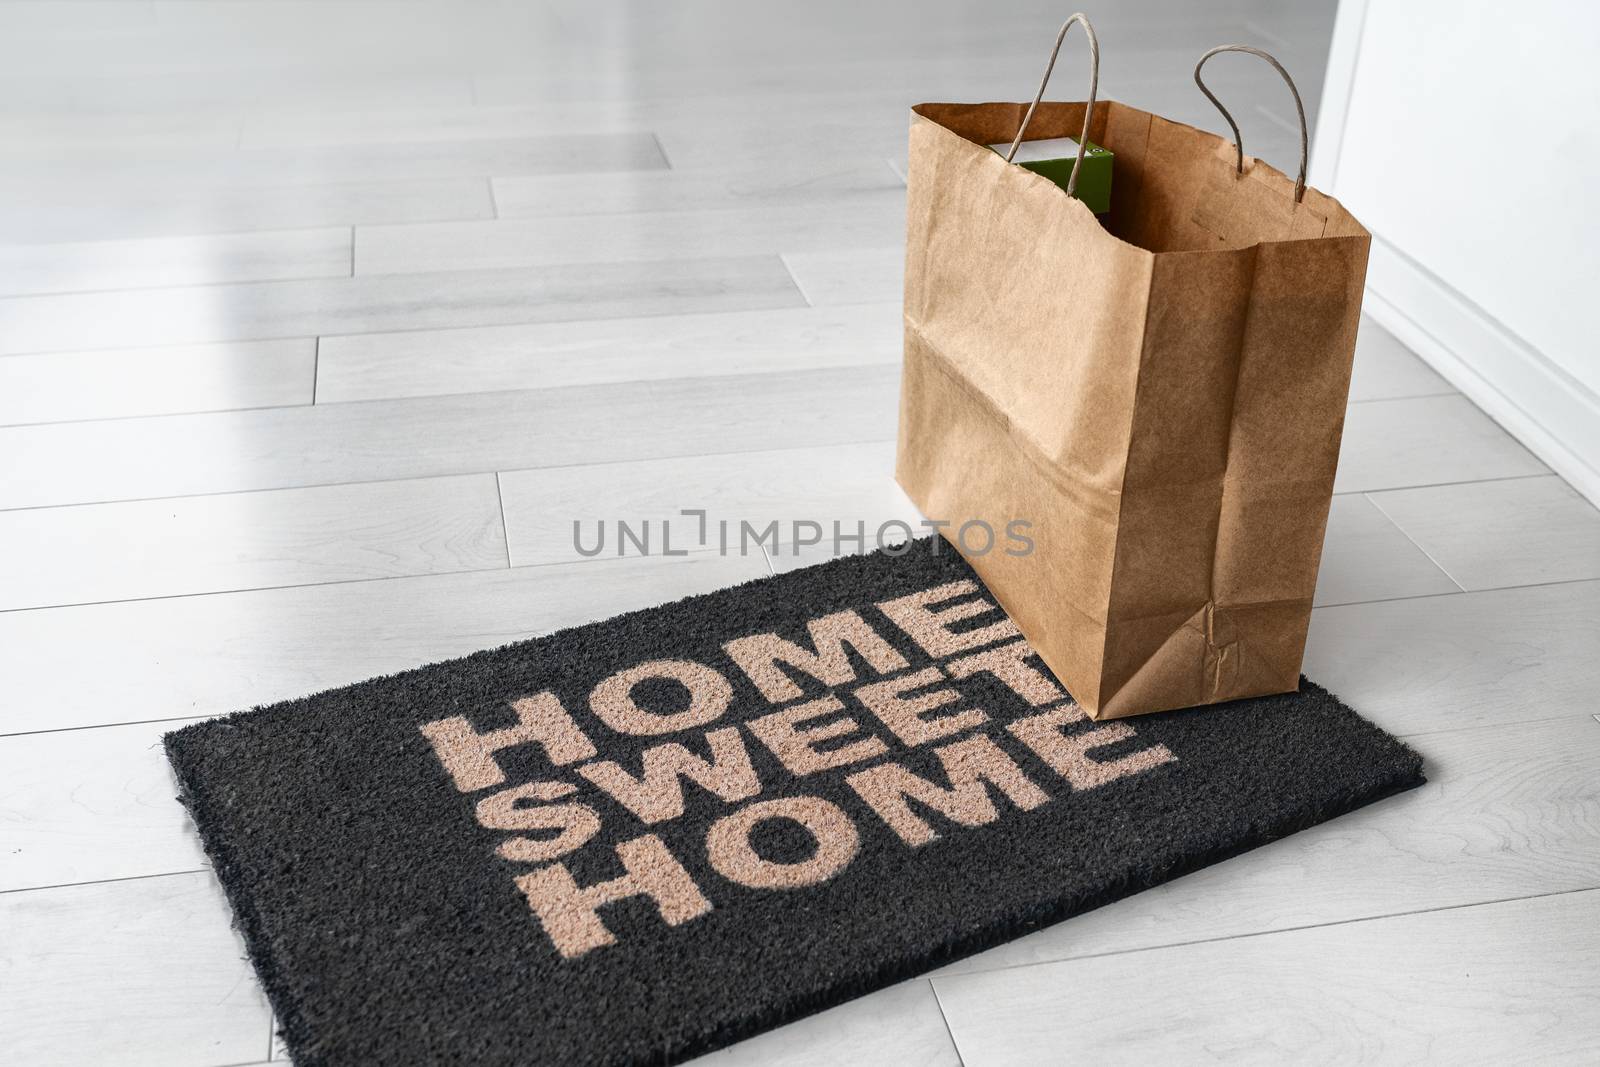 Home delivery of food grocery bag left at door entrance mat for Corona virus prevention safety. Precaution measures against COVID-19, paper shopping bag delivered without contact.